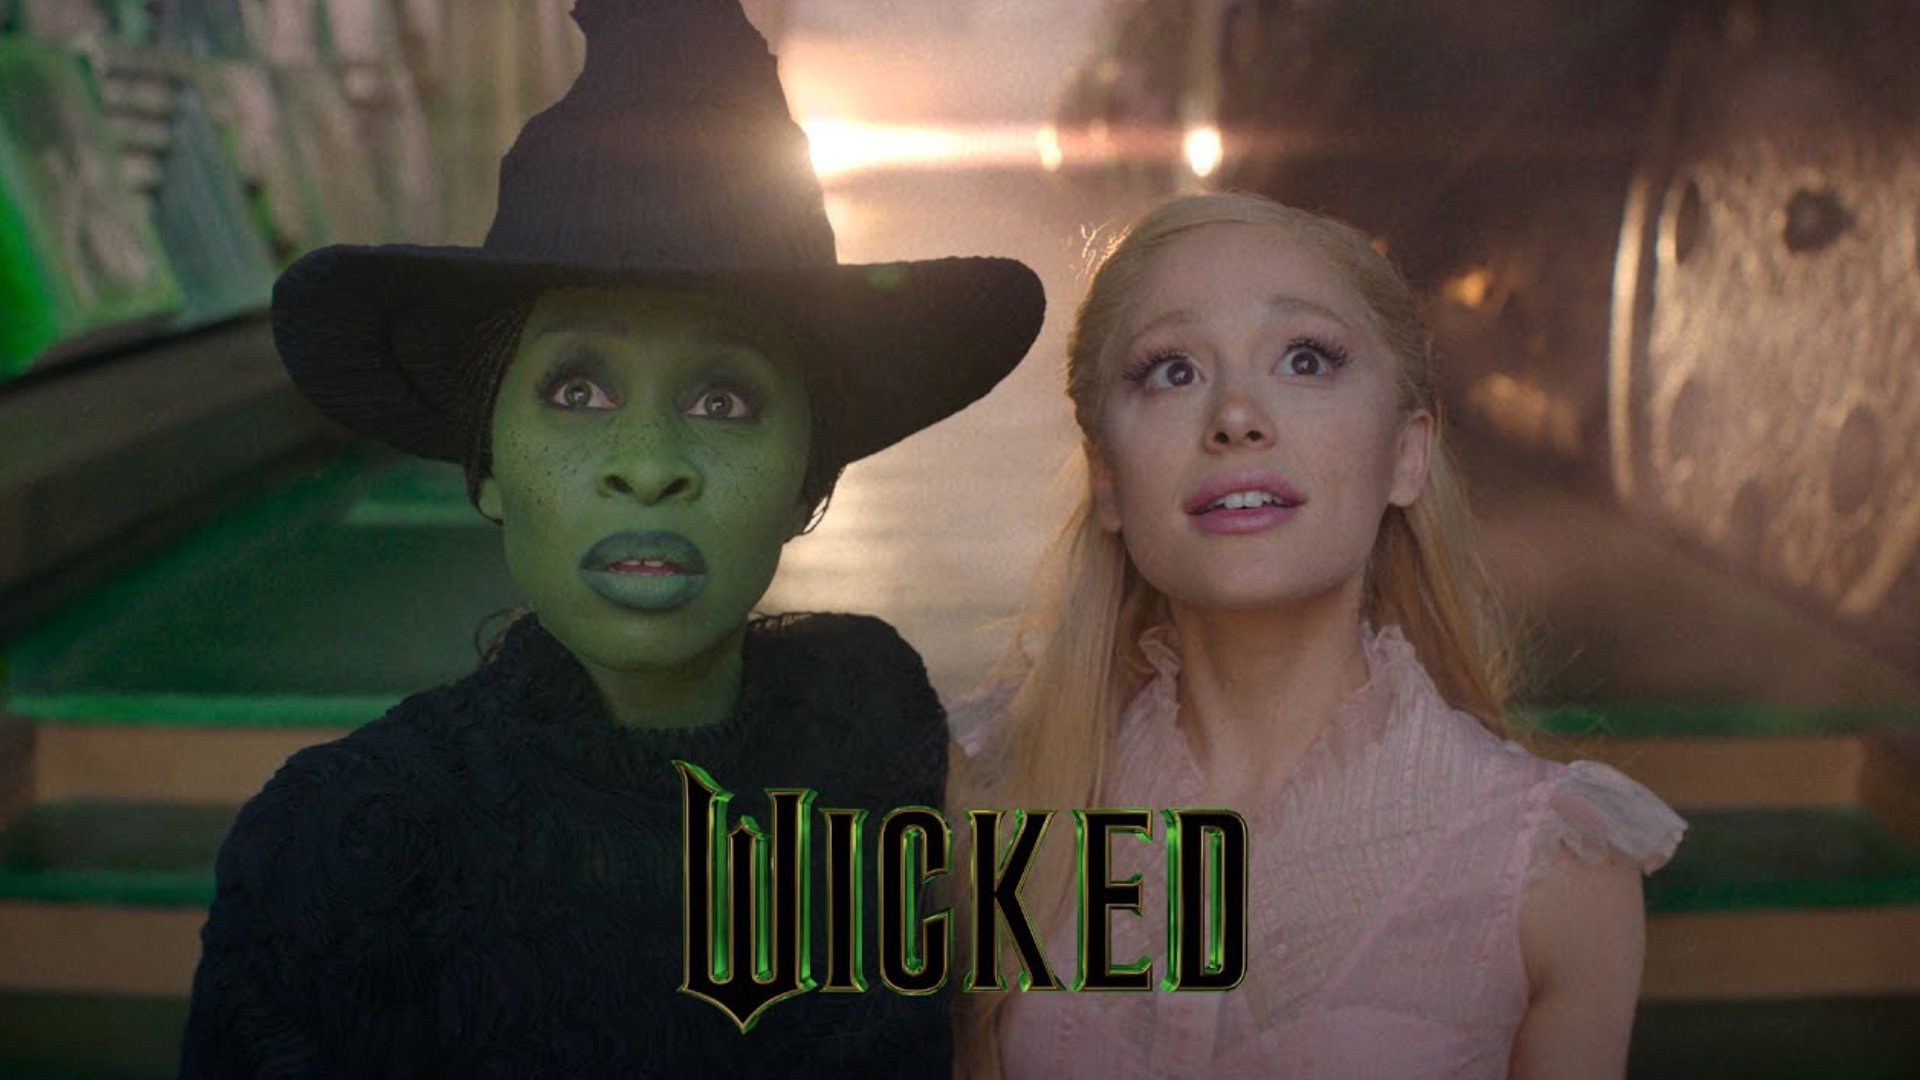 Wicked movie release date and trailer - Stageberry